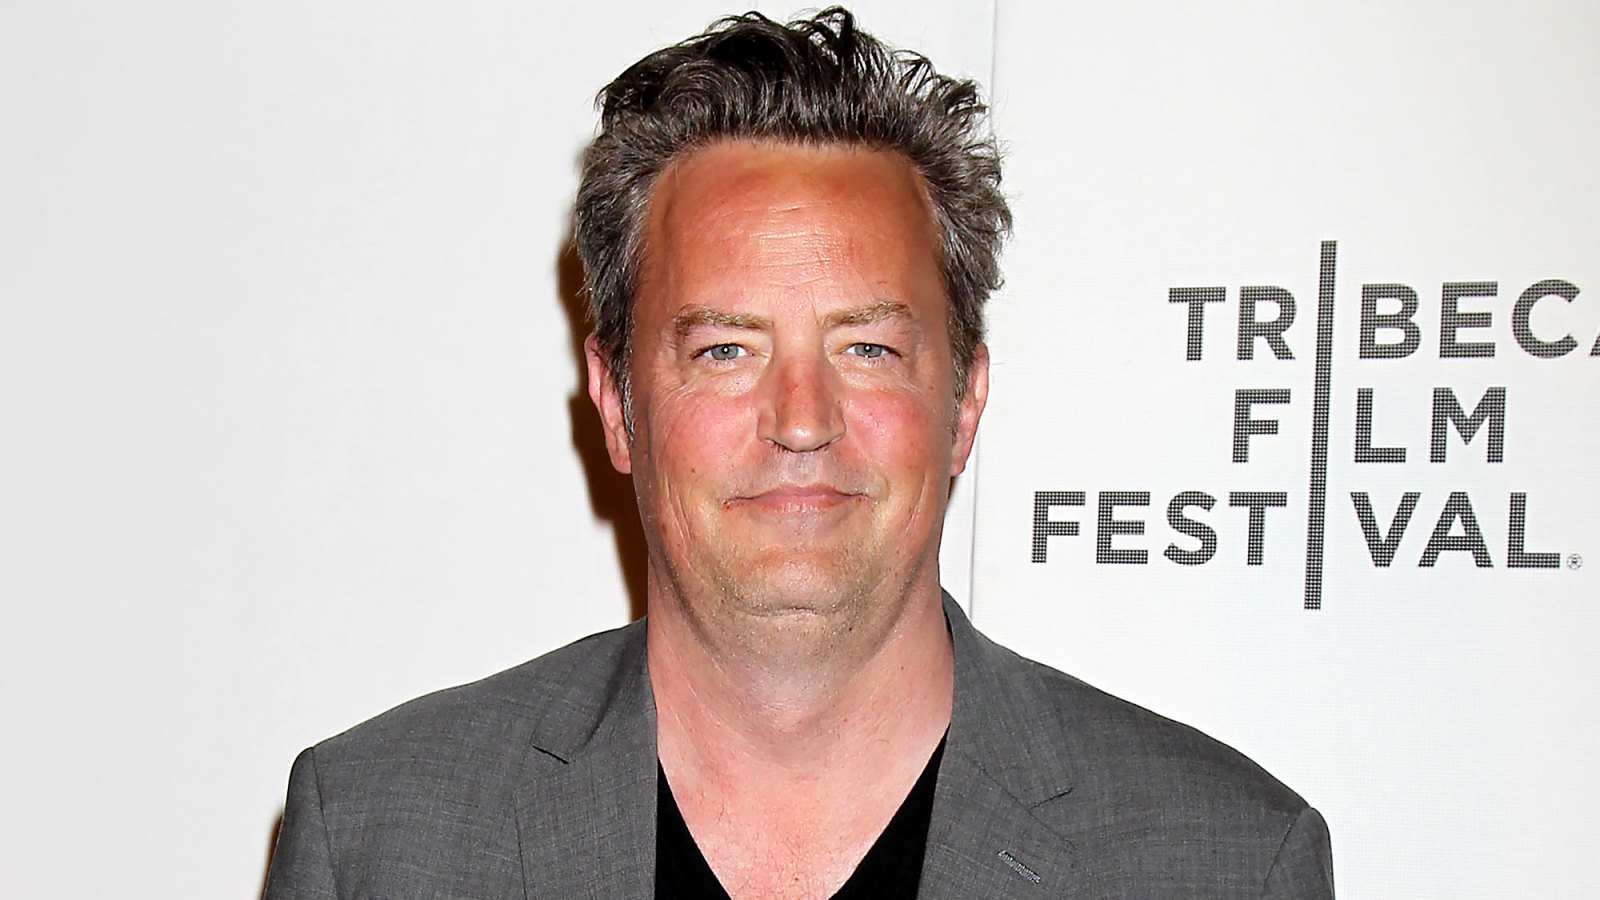 Matthew Perry Says He’s ‘Lived to Tell the Tale’ While Announcing His Memoir